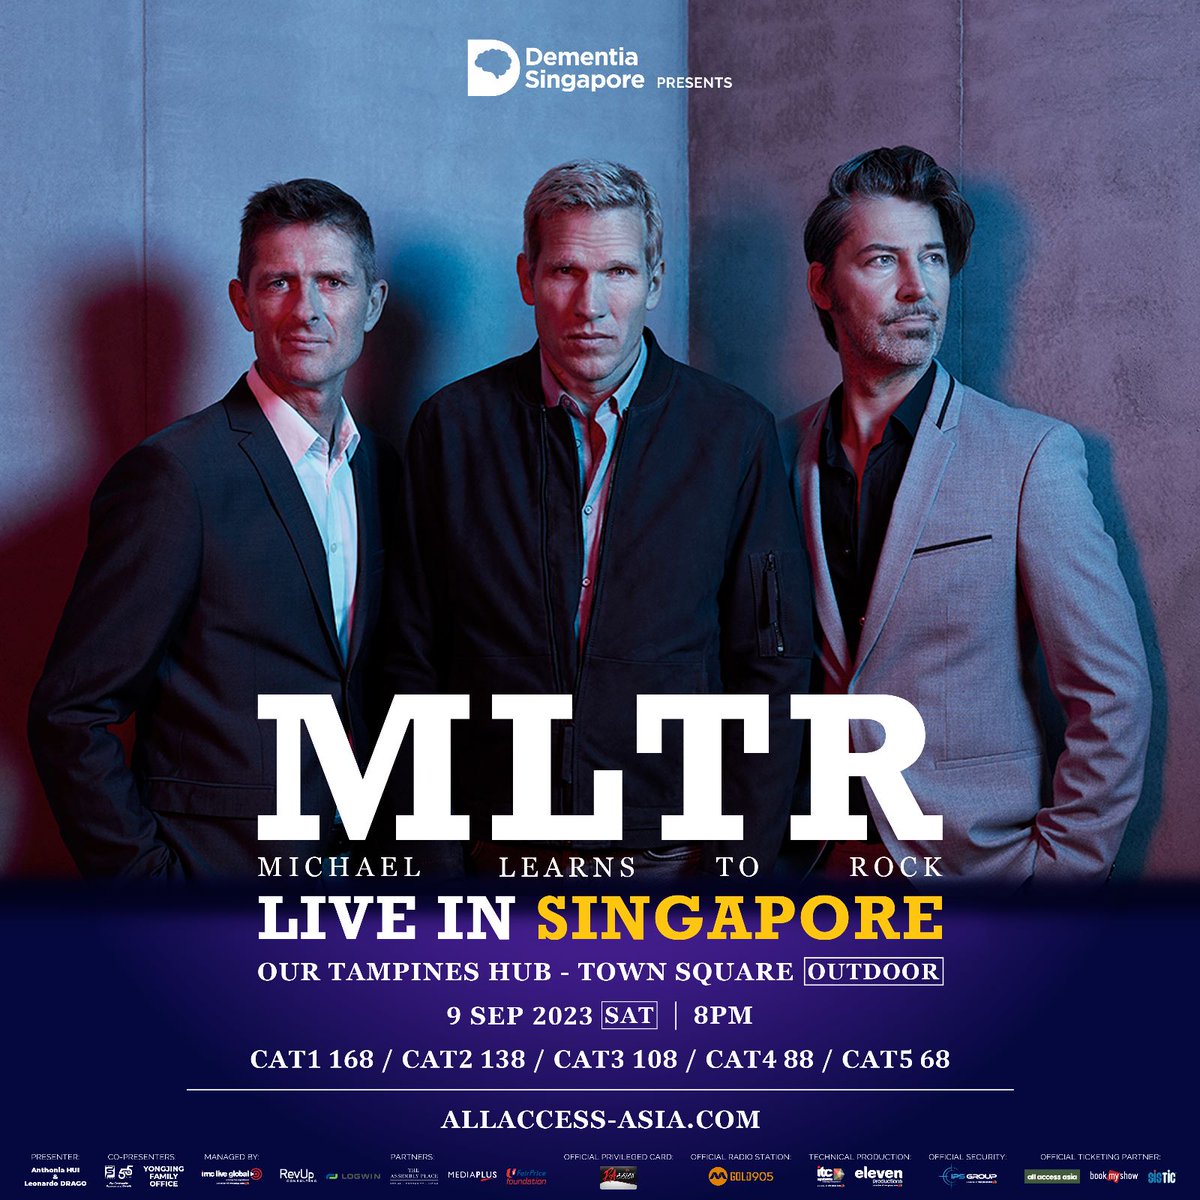 LIVE IN SINGAPORE 🤩 We are excited to announce that we will come to Singapore on September 9! We hope to see you there 🙏🏻 💙 MLTR - - - #MLTR #livemusic #concert #singapore #michaellearnstorock